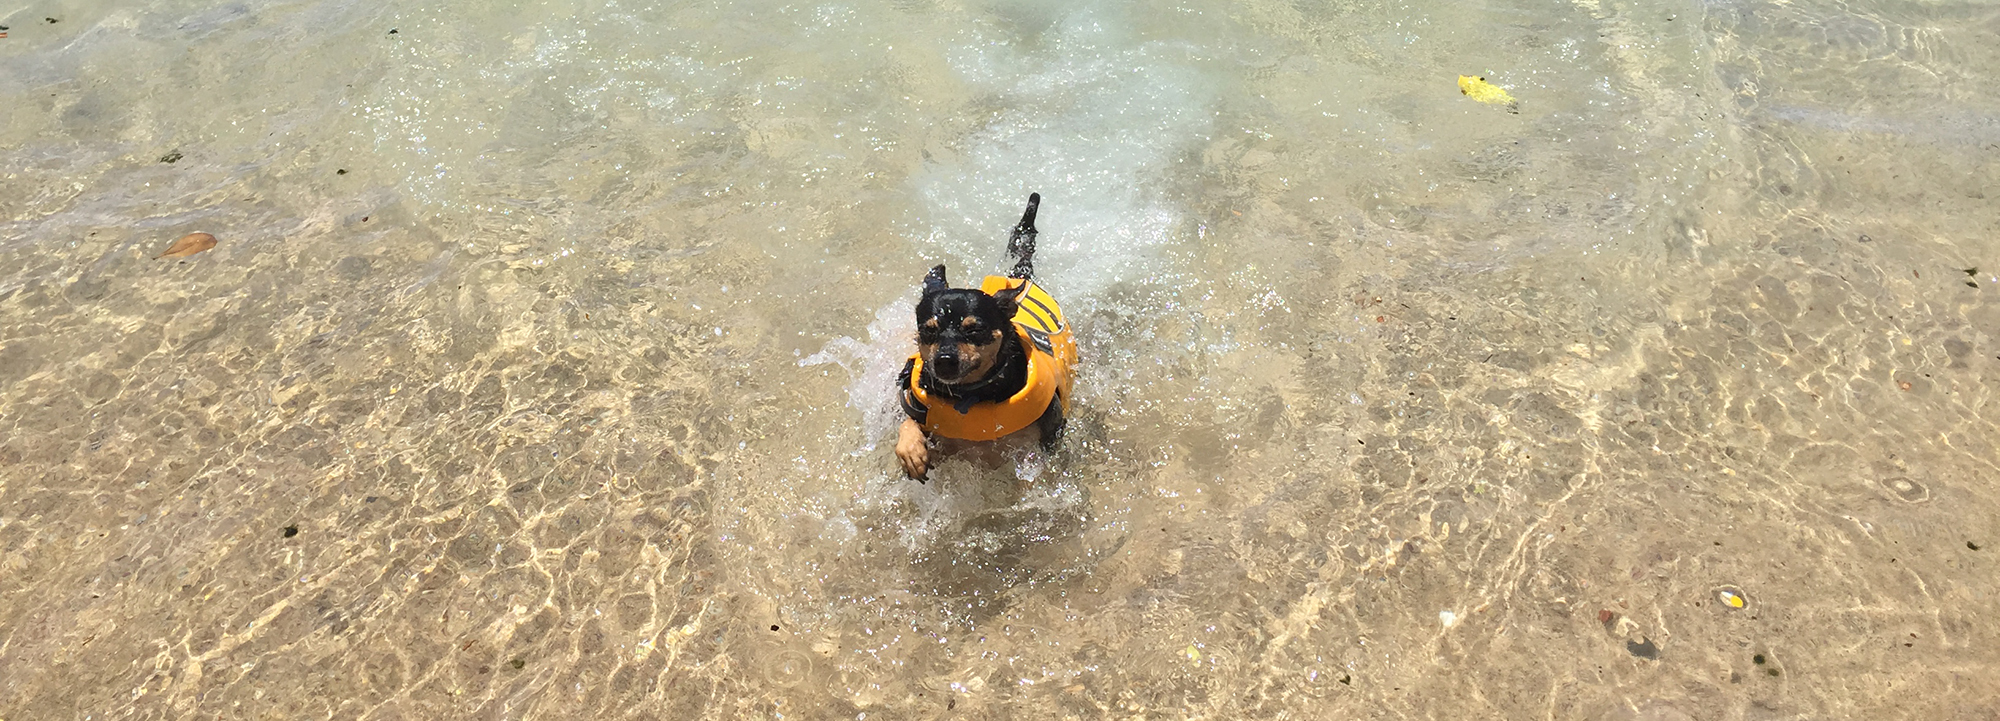 VIDEO:  How to teach a dog to swim in the ocean:  Step One